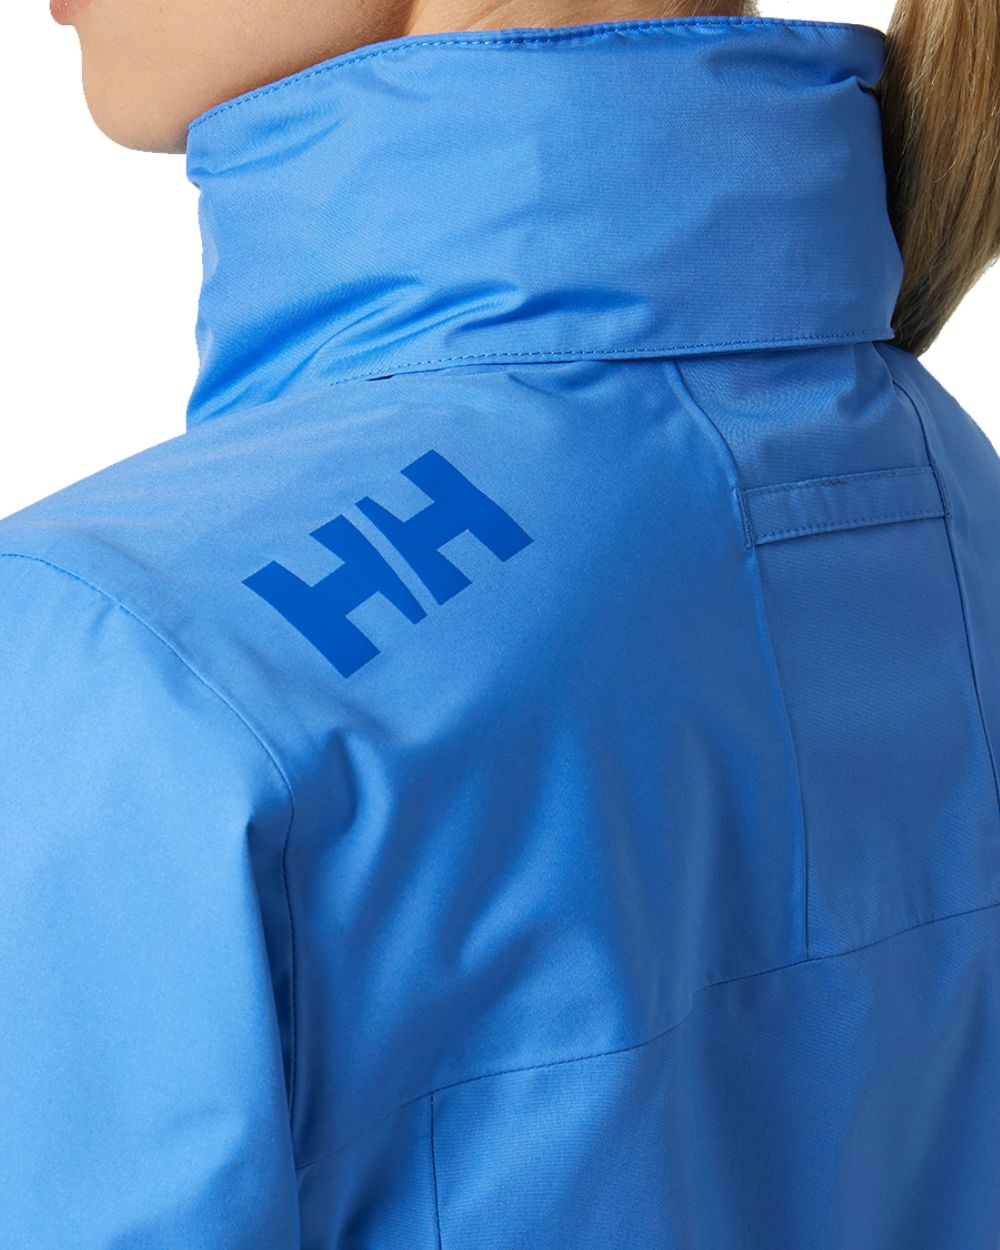 Ultra Blue Coloured Helly Hansen Womens Crew Hooded Midlayer Sailing Jacket 2.0 On A White Background 